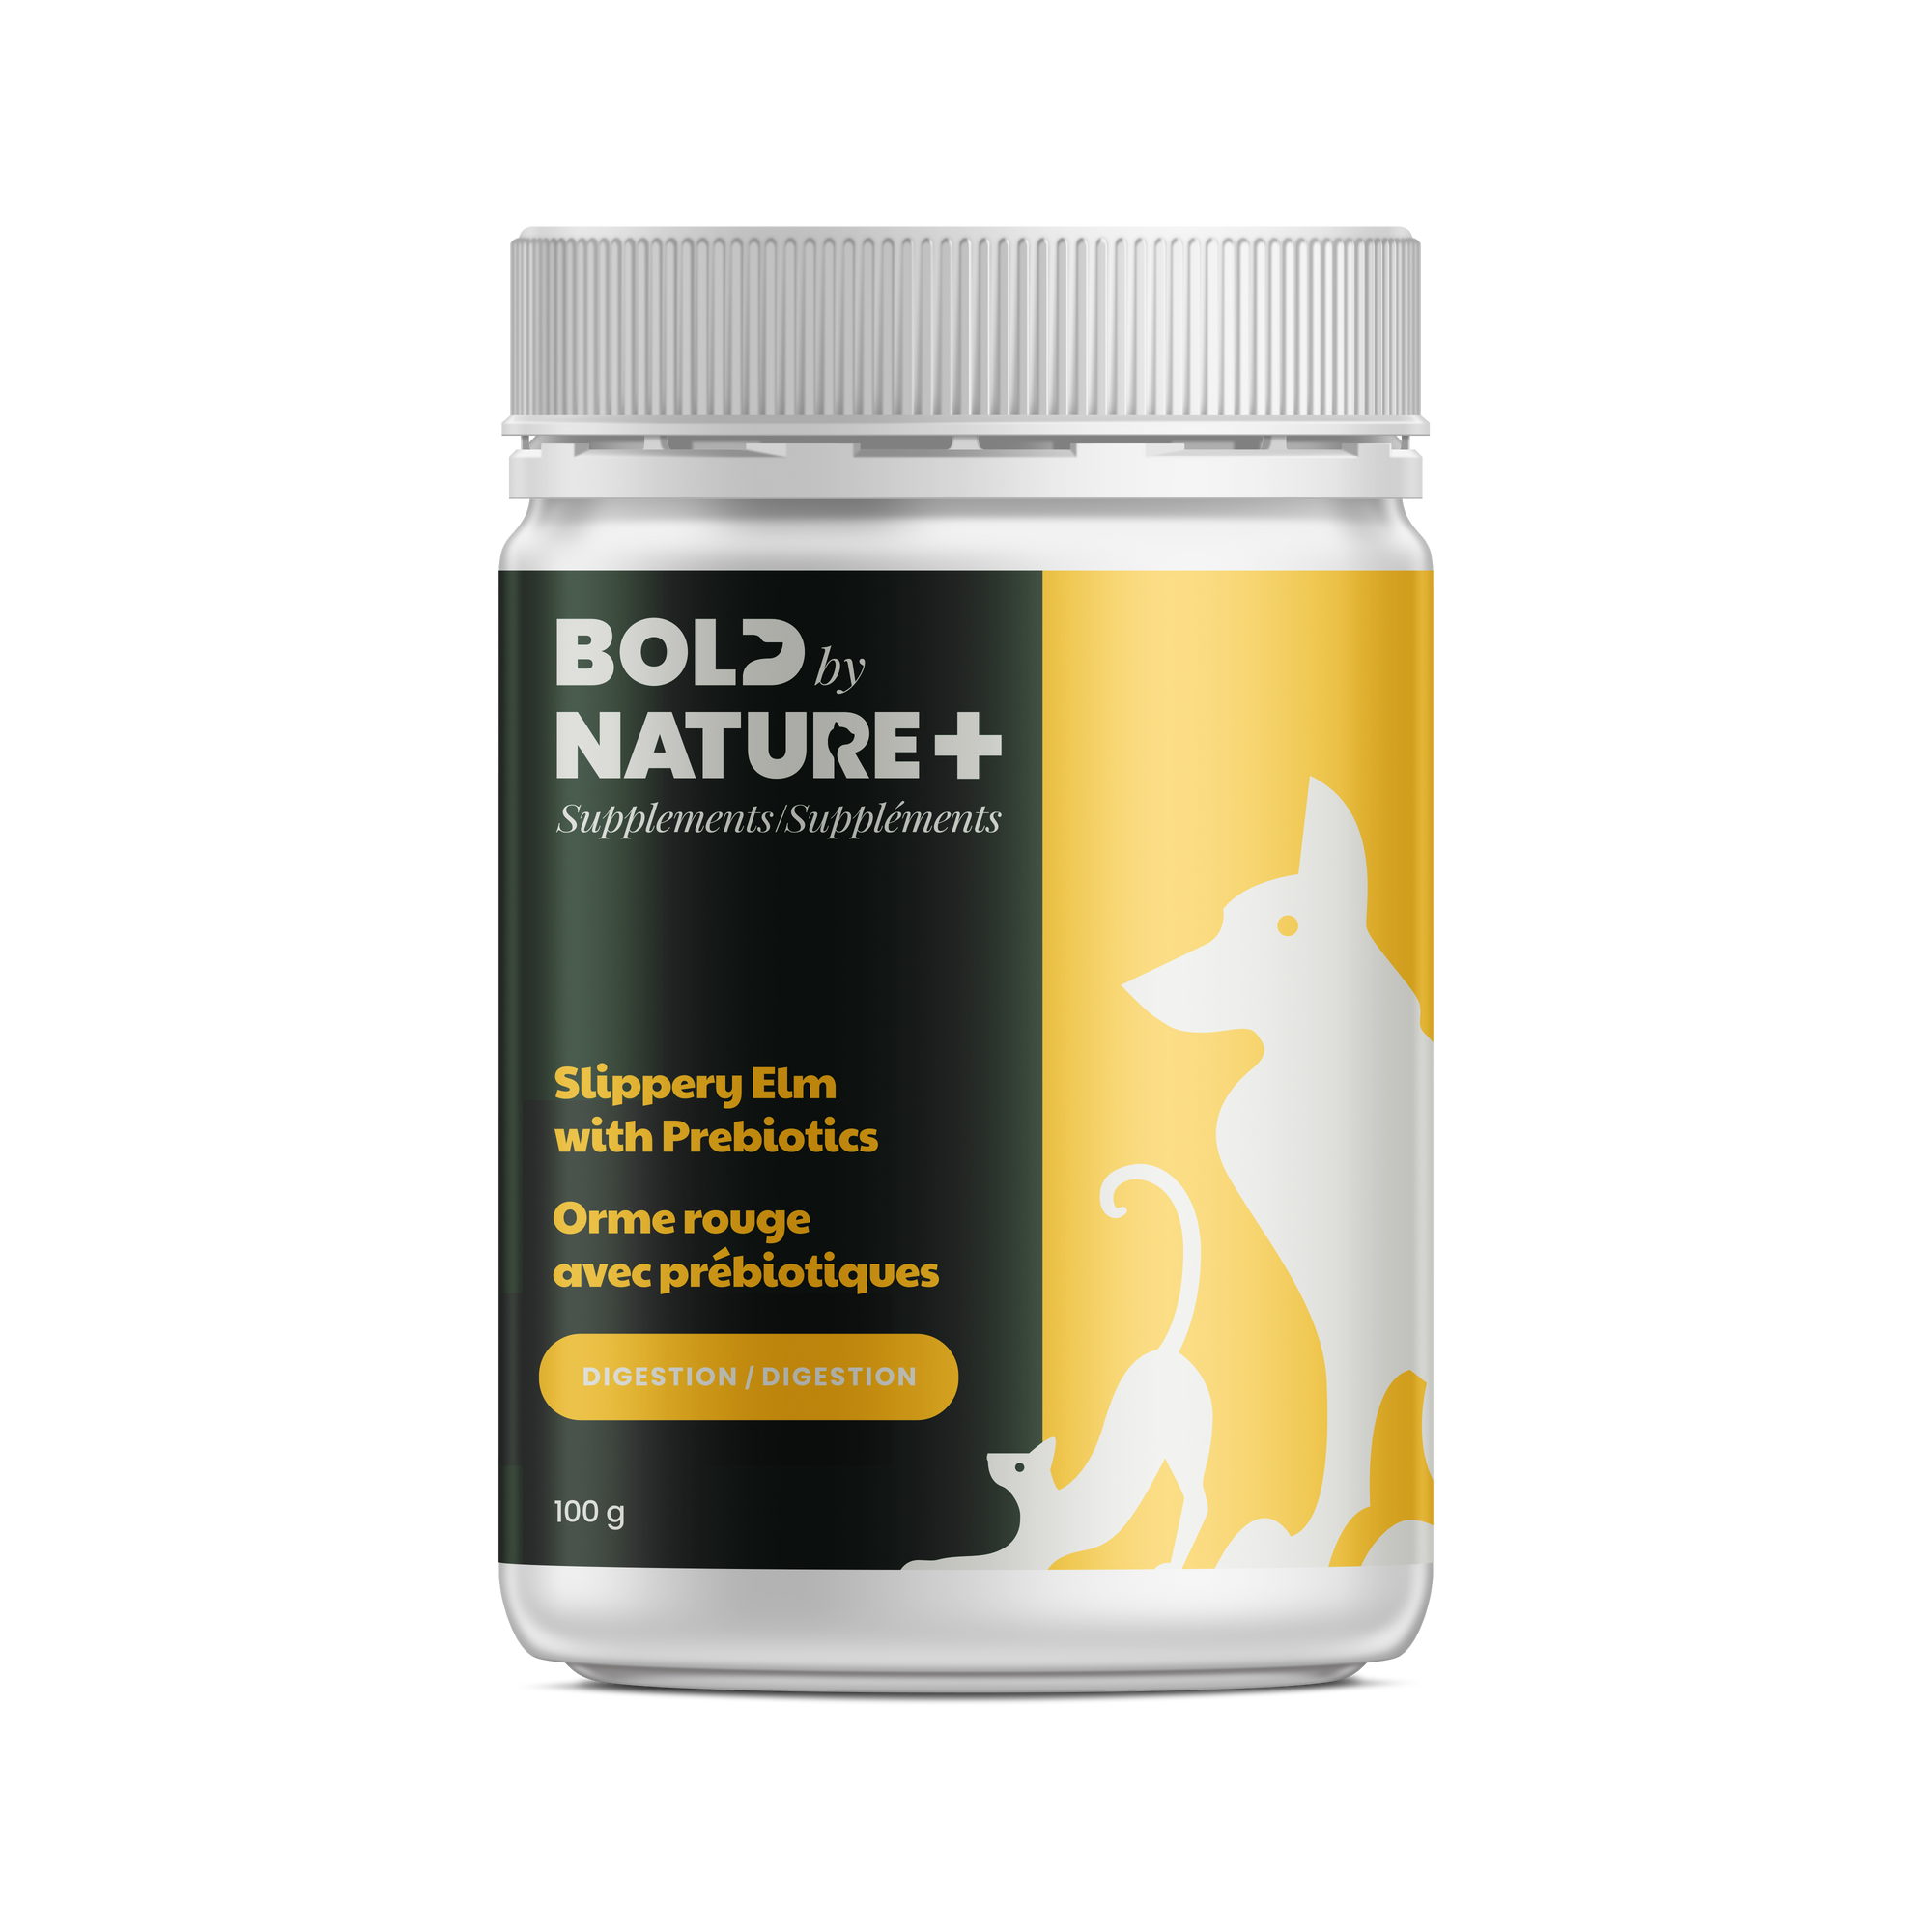 Bold by Nature Supplements - Slippery Elm with Probiotics for Dogs & Cats (3.5oz/100g)